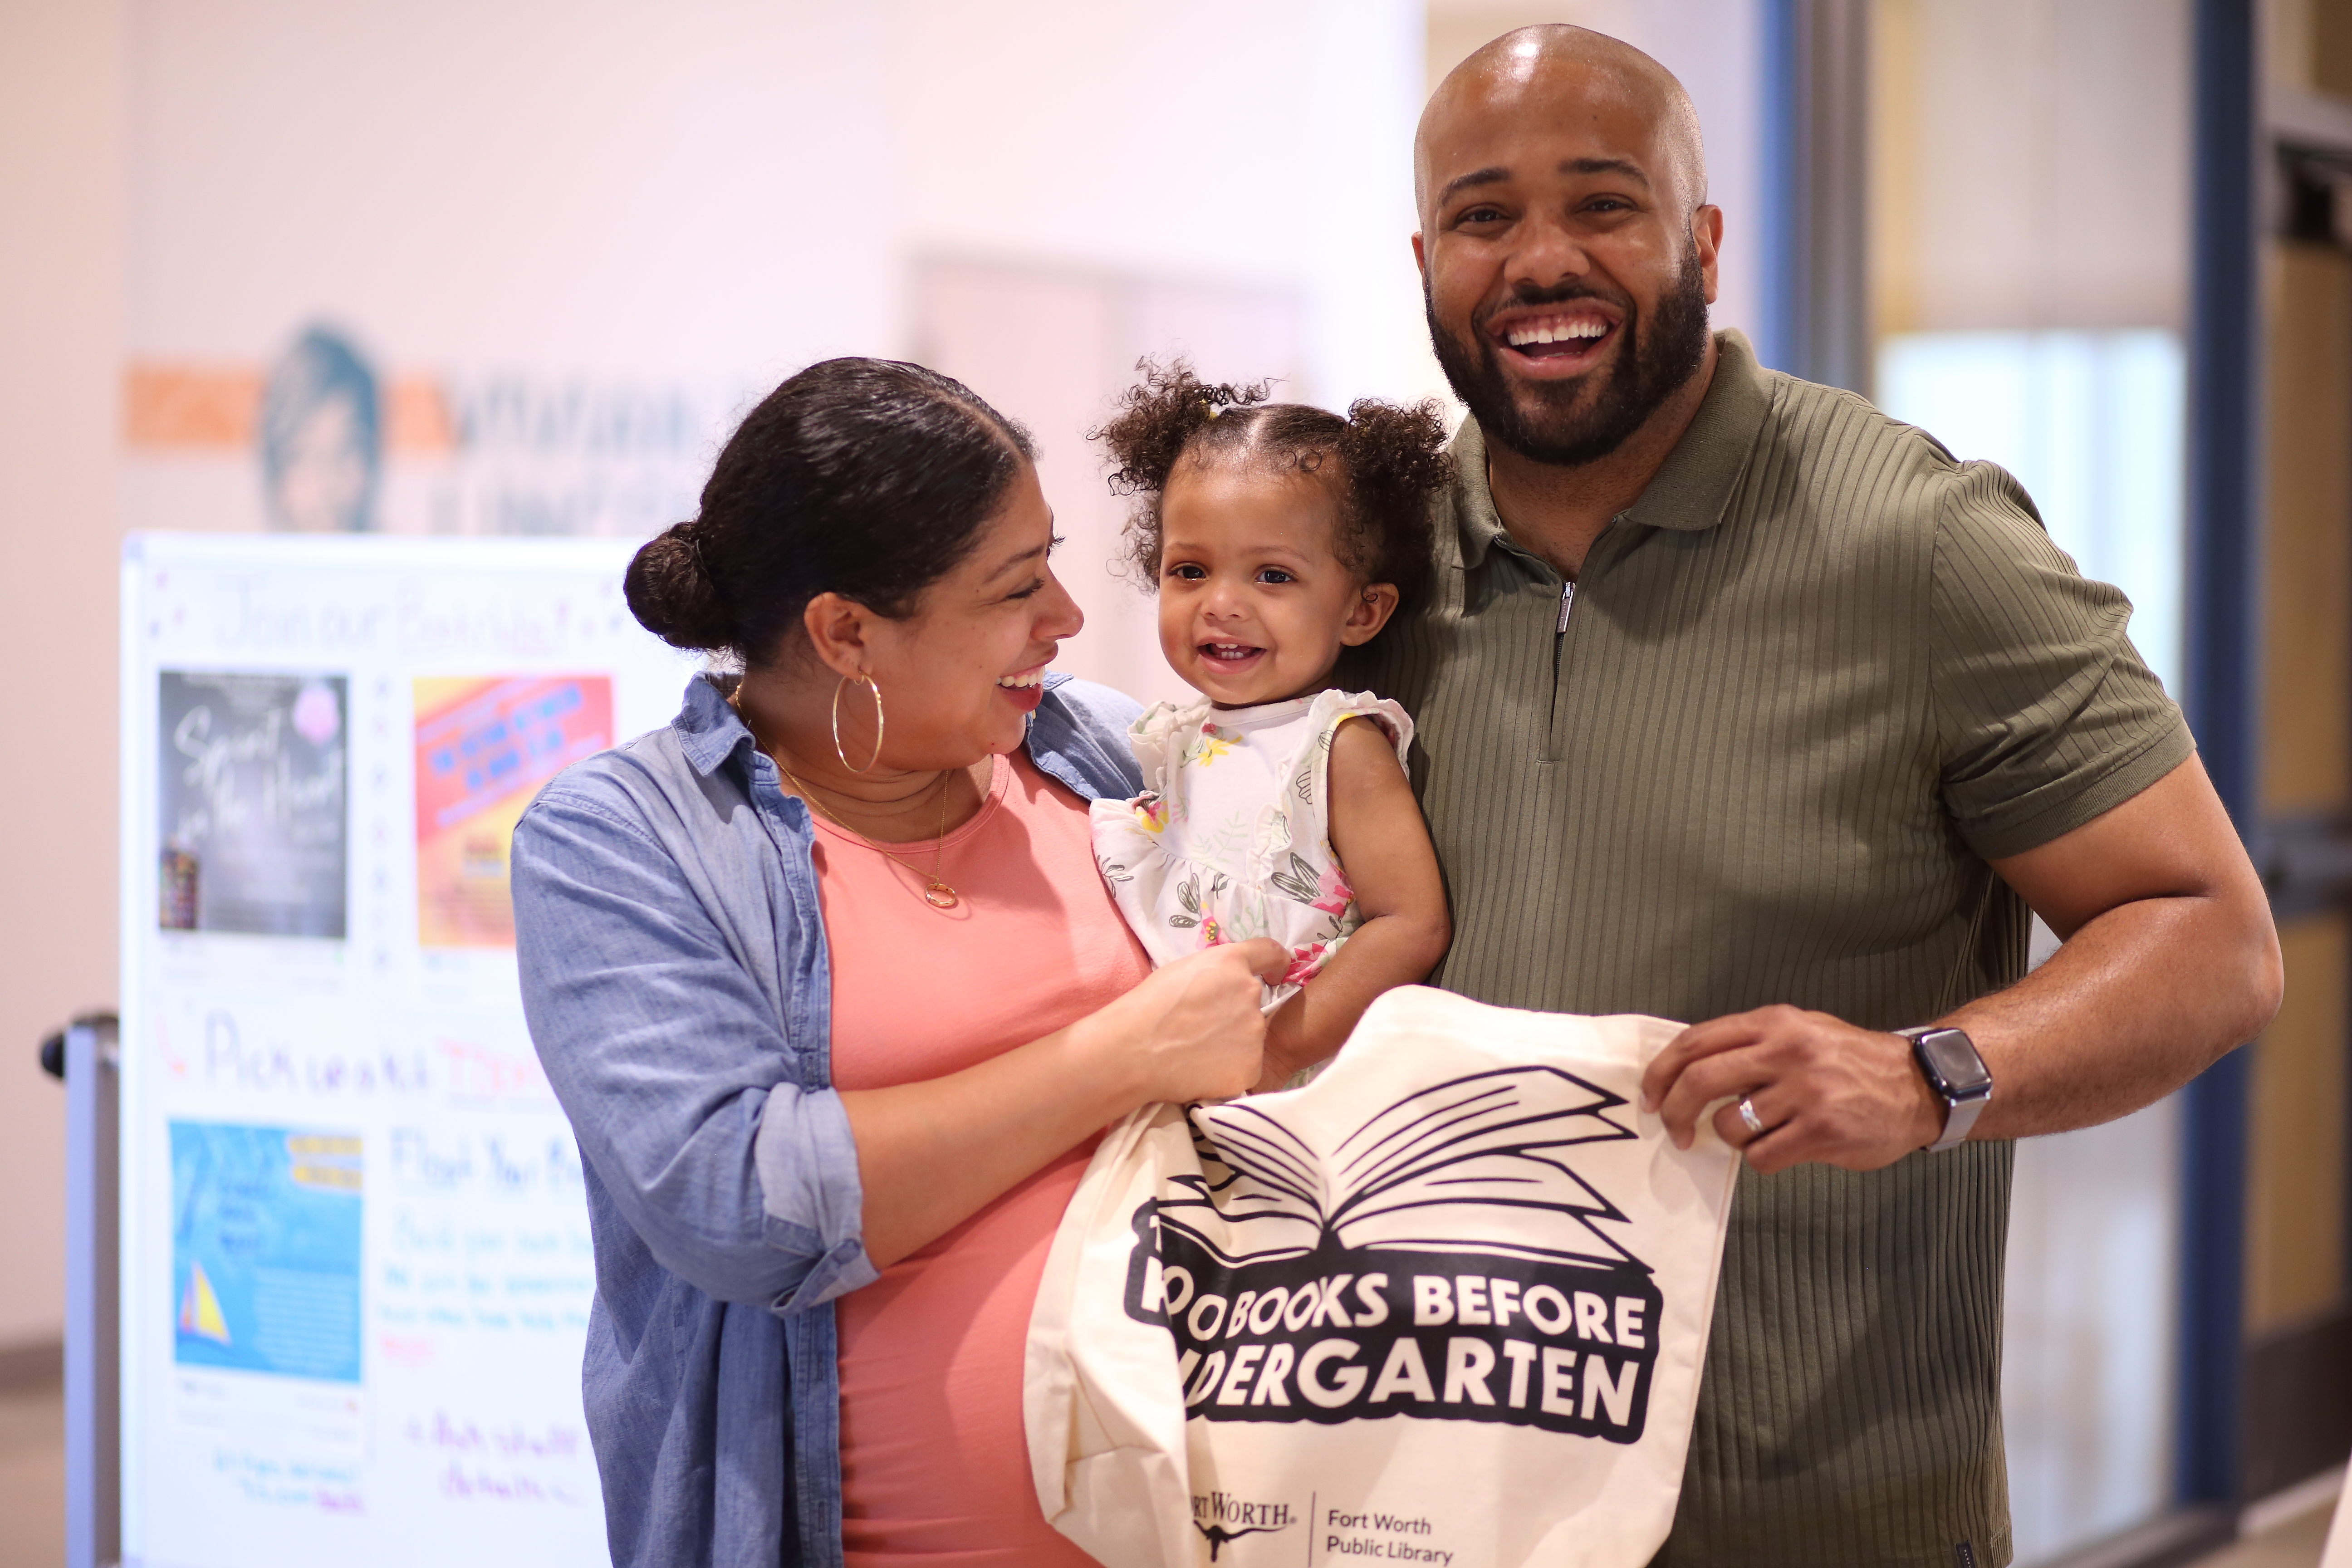 Councilman Jared Williams and his family at the Lincoln Library